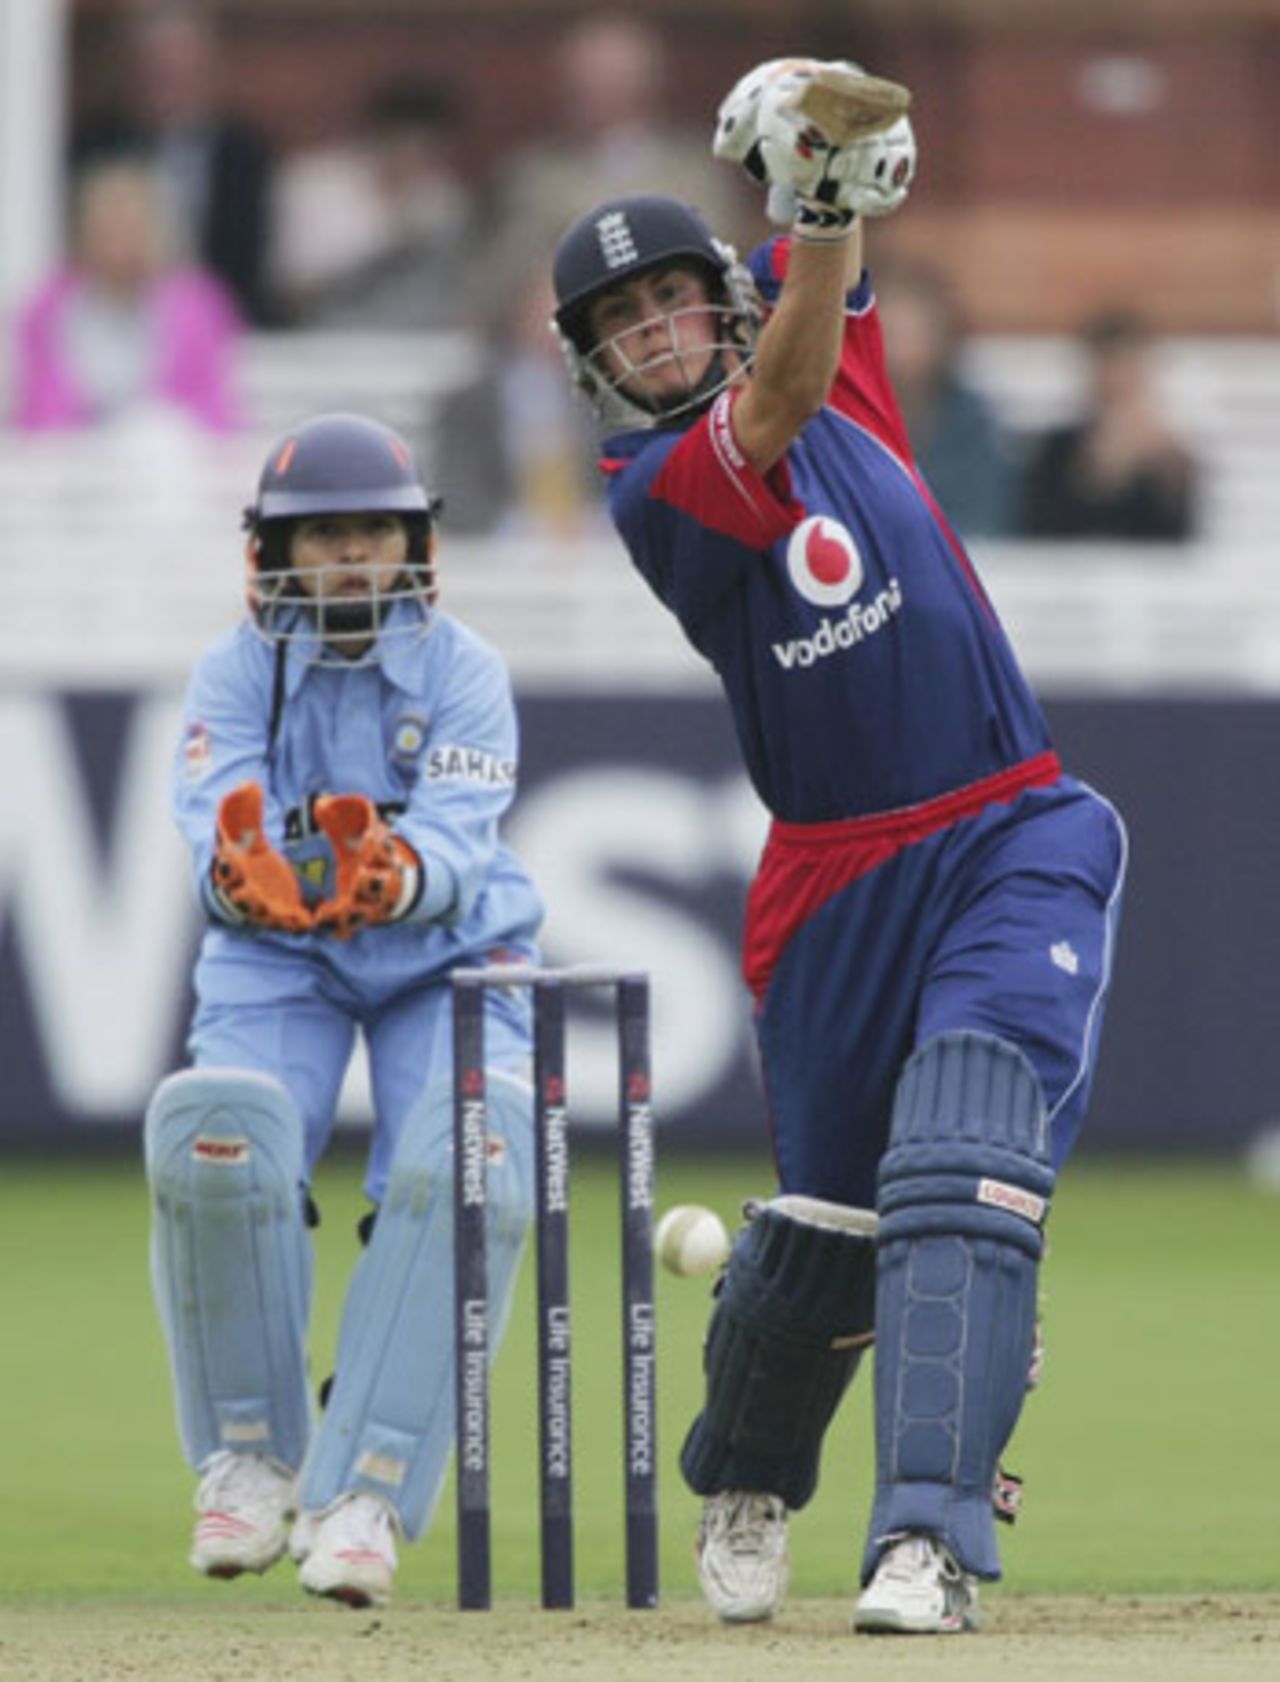 Laura Newton punches with a flourish of the bat, England Women v India Women, 1st ODI, Lord's, August 14, 2006